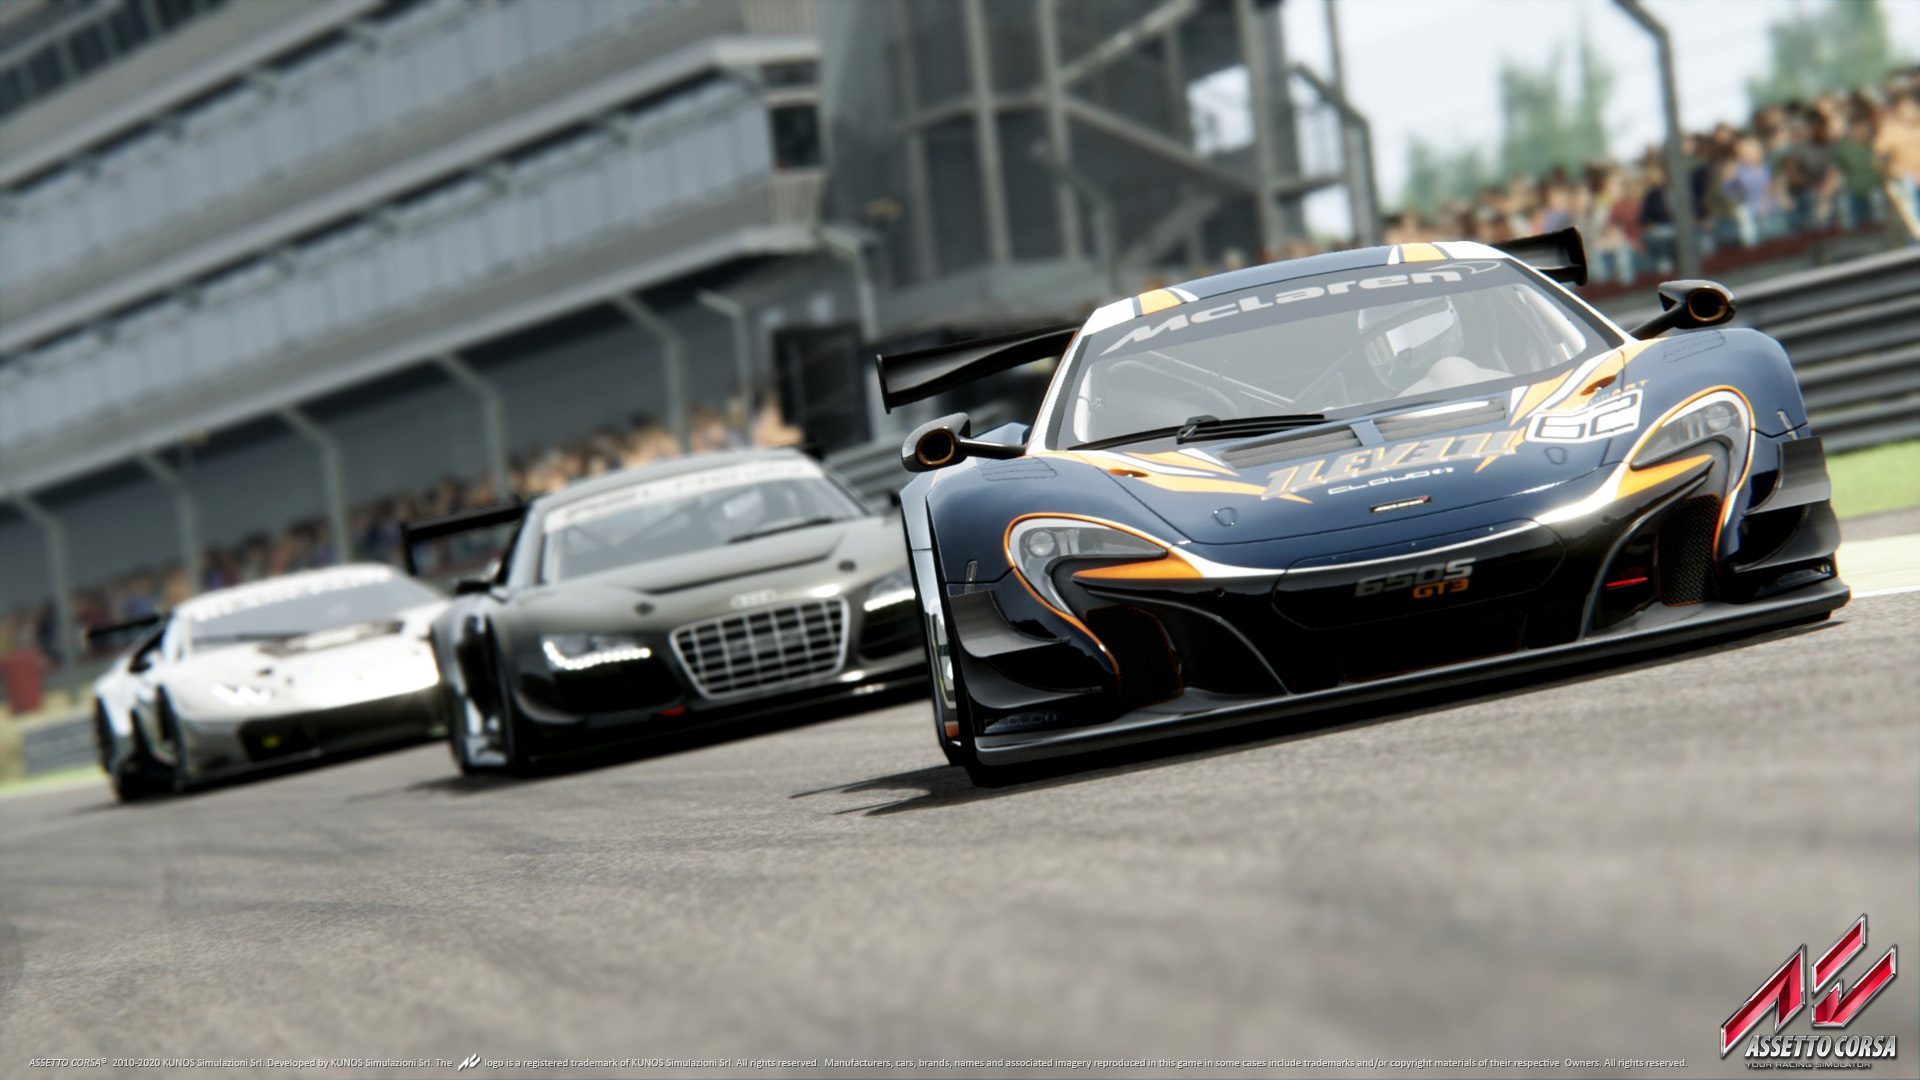 Here's the full track list for Assetto Corsa on PS4 - Team VVV